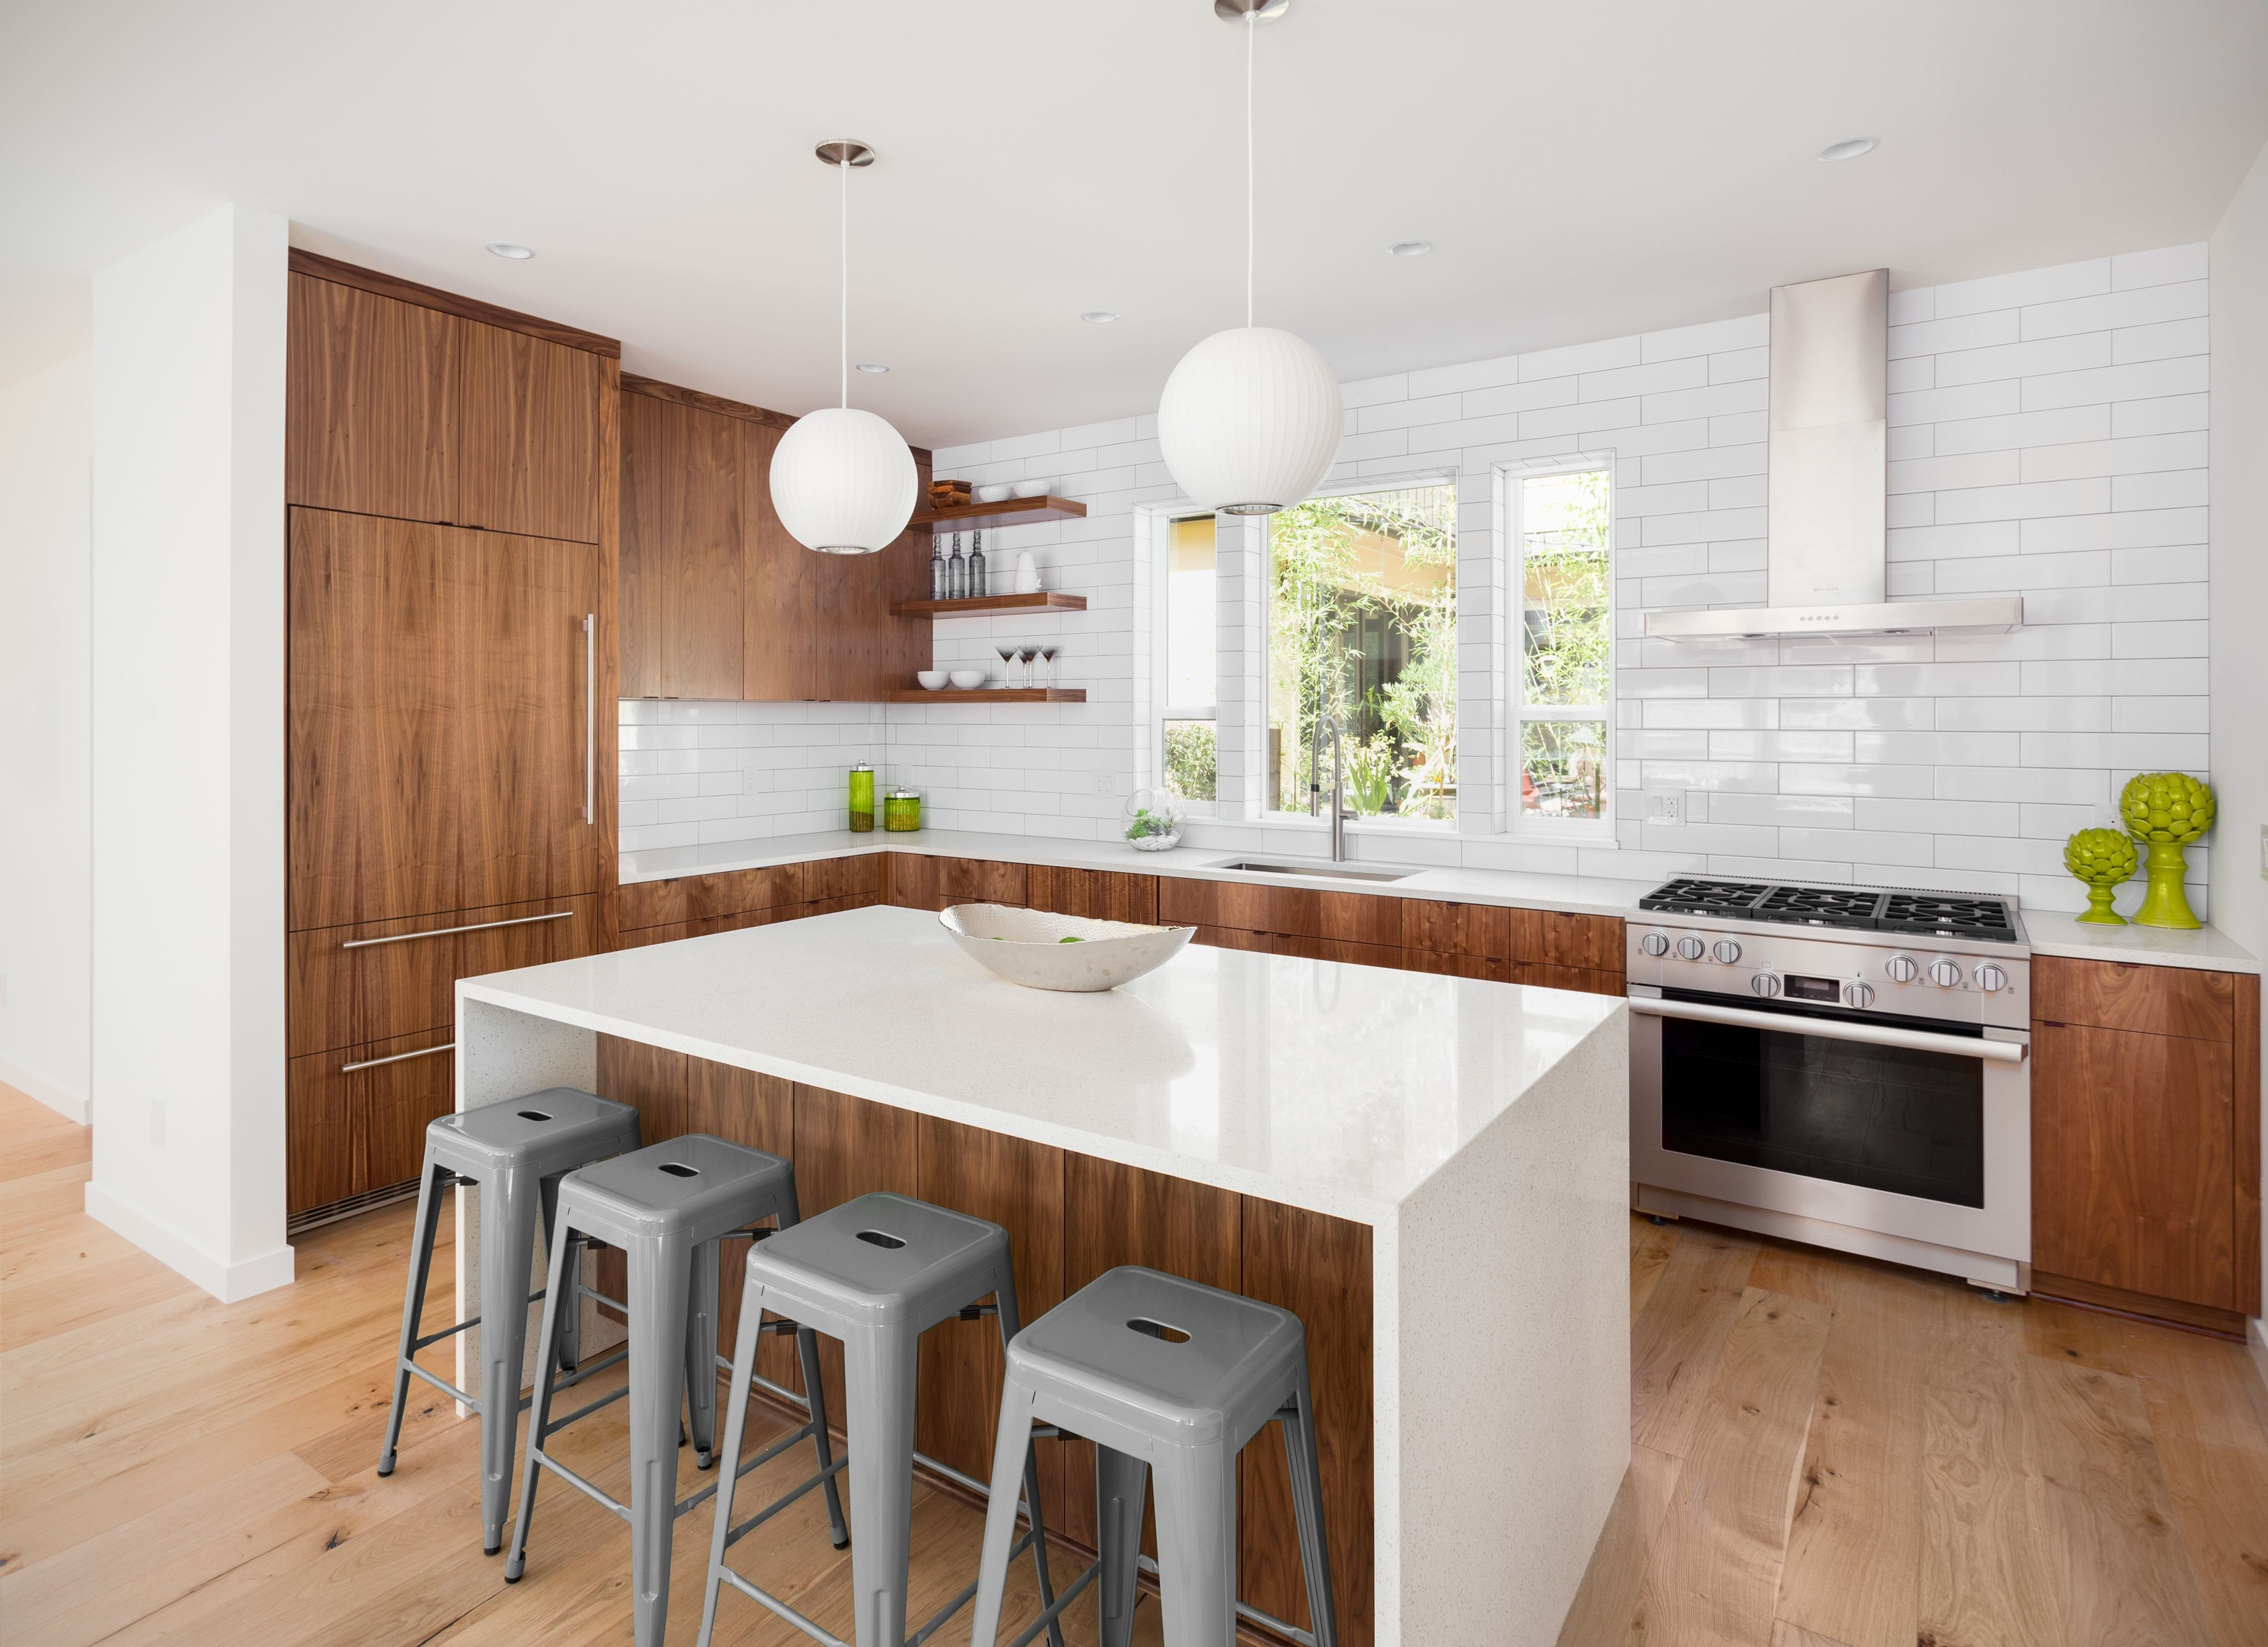 12 attractive Two tone Hardwood Floor Ideas 2024 free download two tone hardwood floor ideas of gorgeous painting kitchen cabinets two different colors painted throughout beautiful kitchen in new luxury home with island pendant lights and hardwood floor